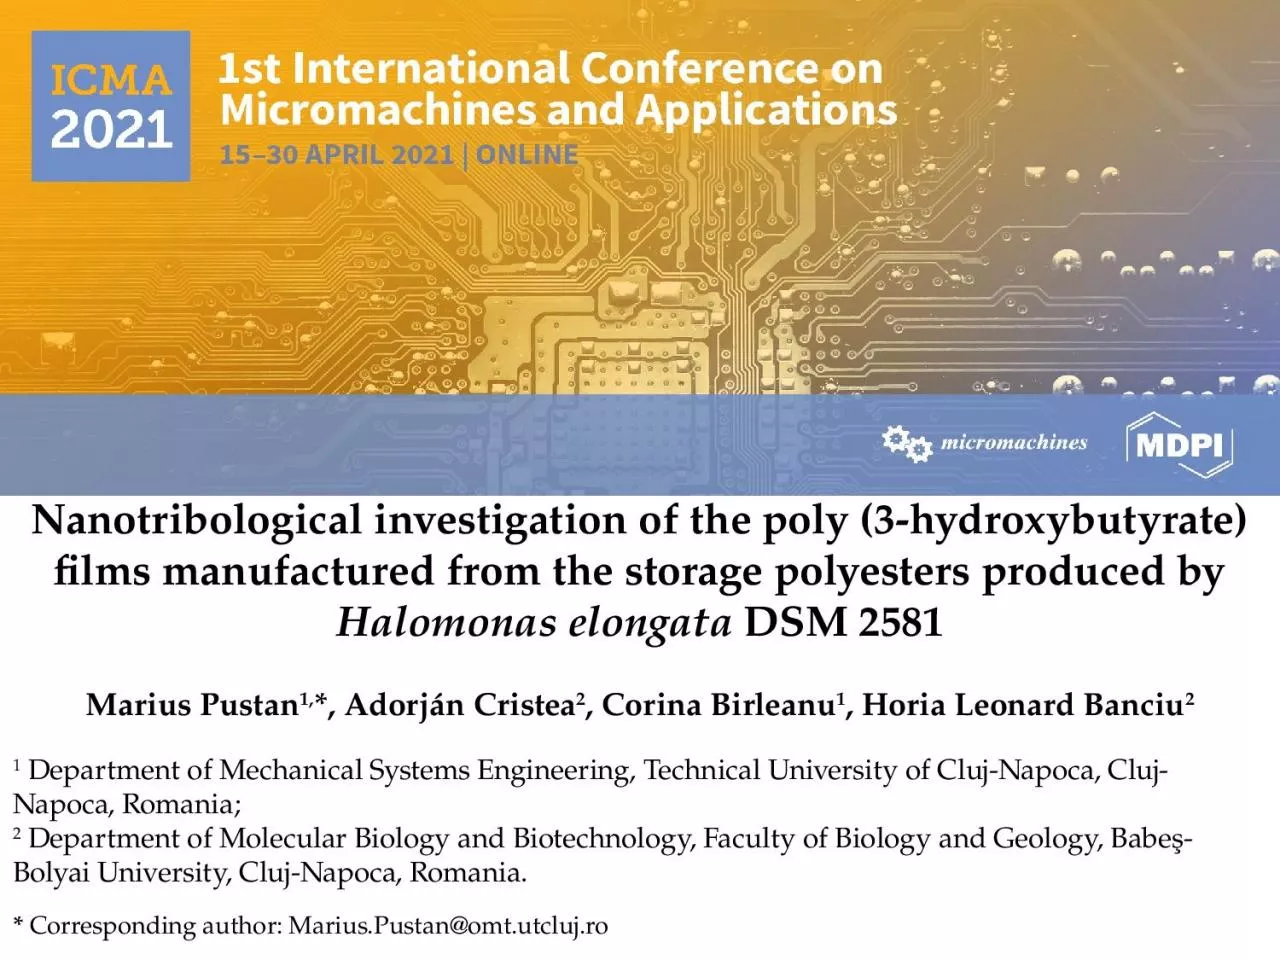 Nanotribological investigation of the poly (3-hydroxybutyrate) films manufactured from